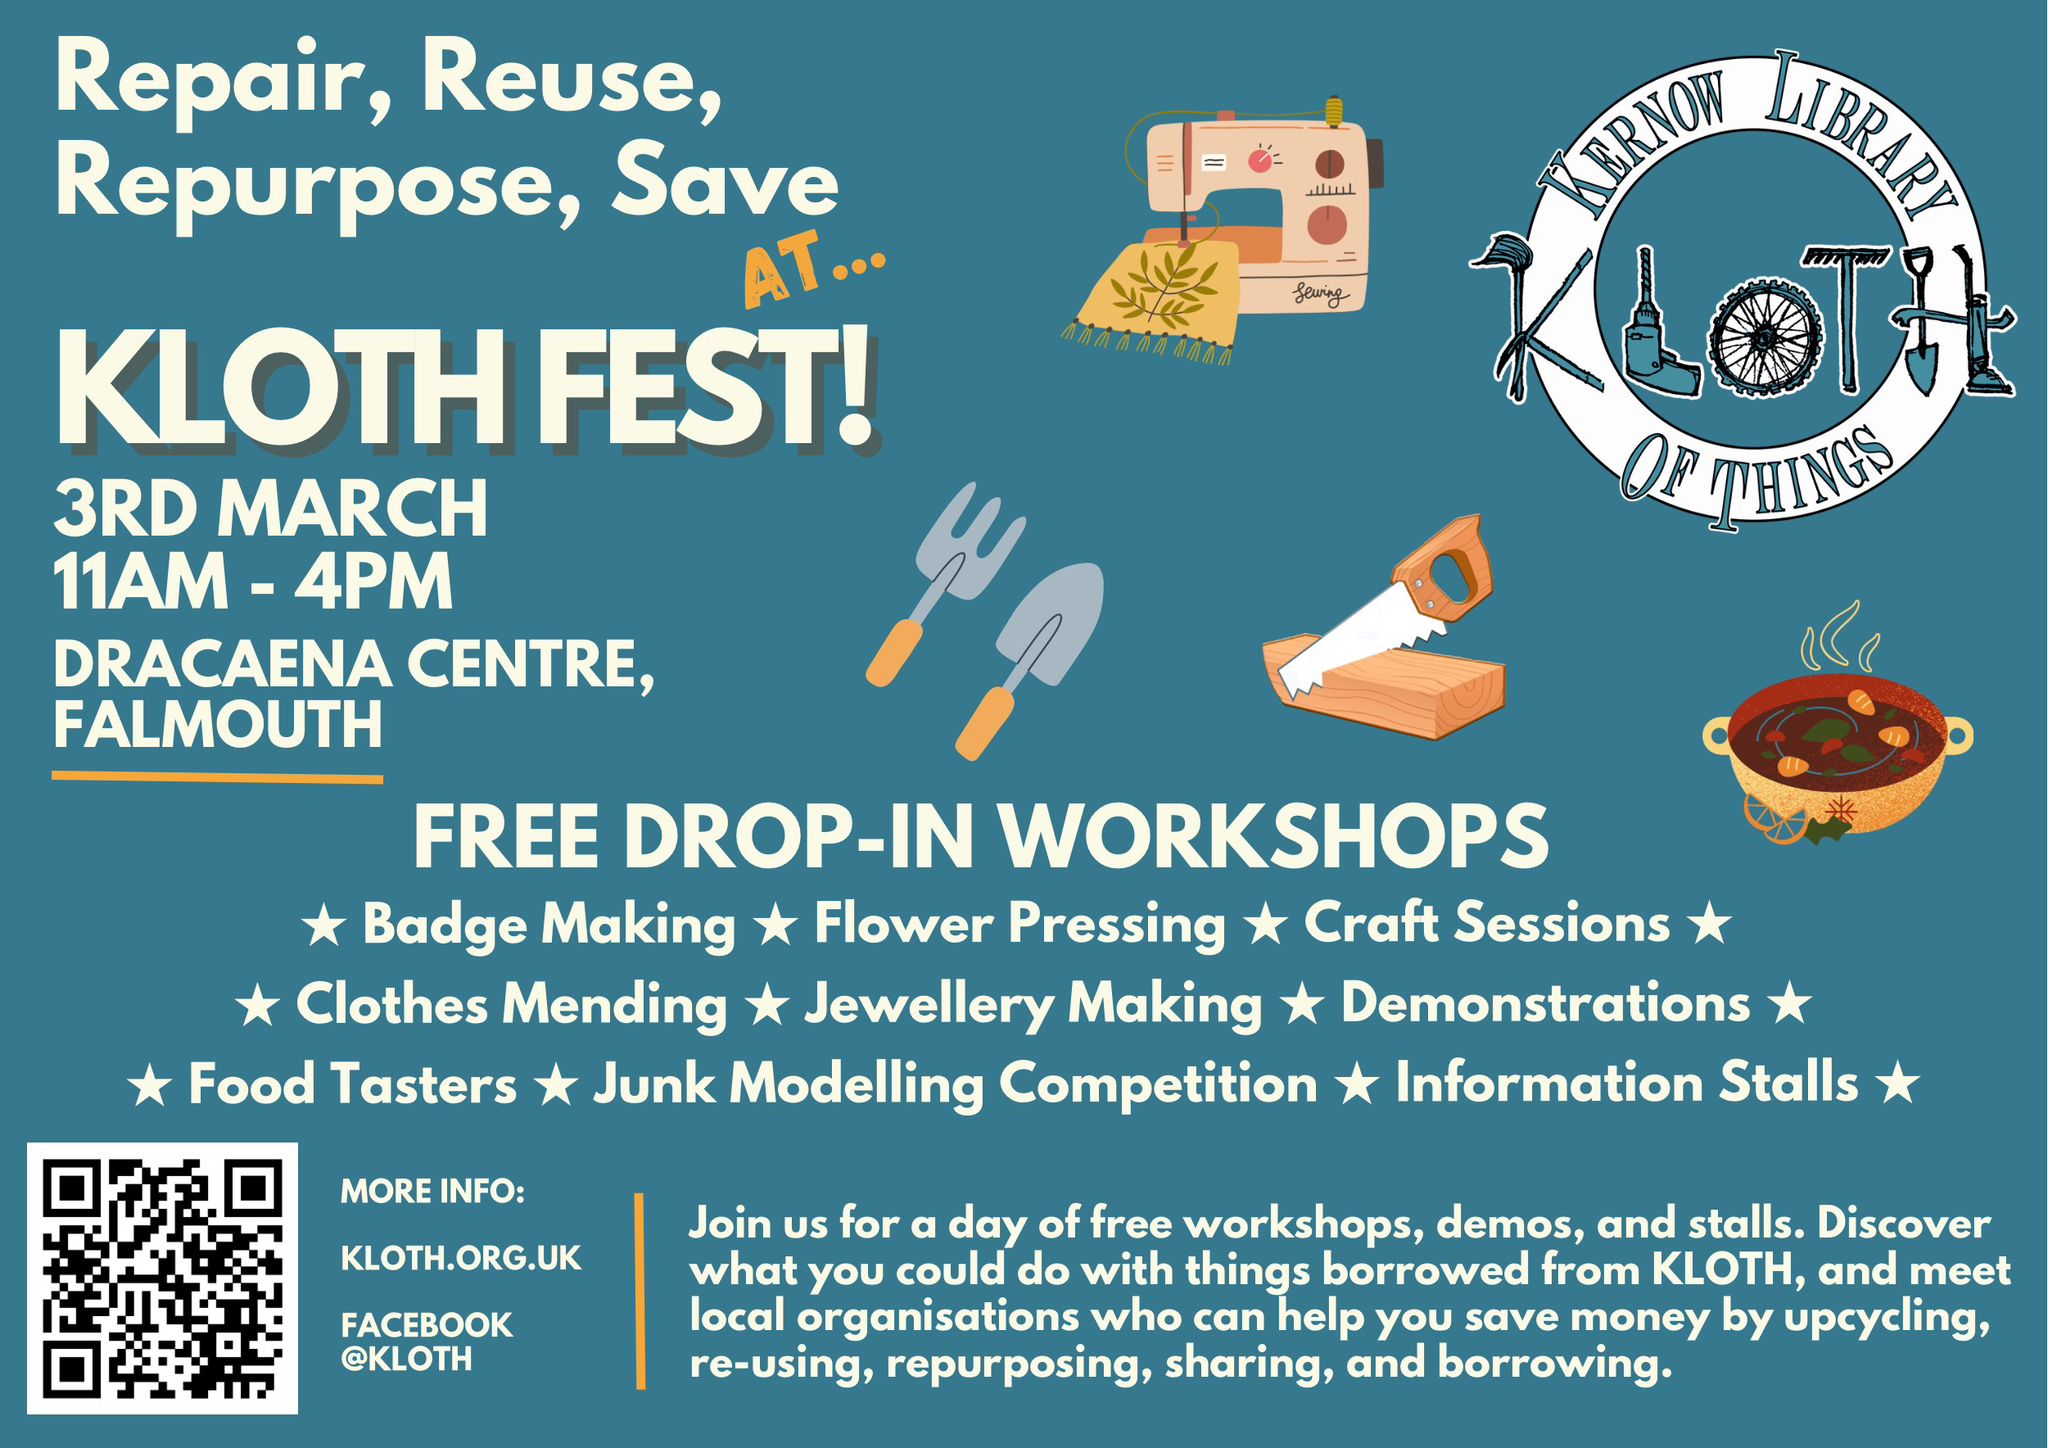 Kloth Fest. 3rd March at the Dracaena Centre